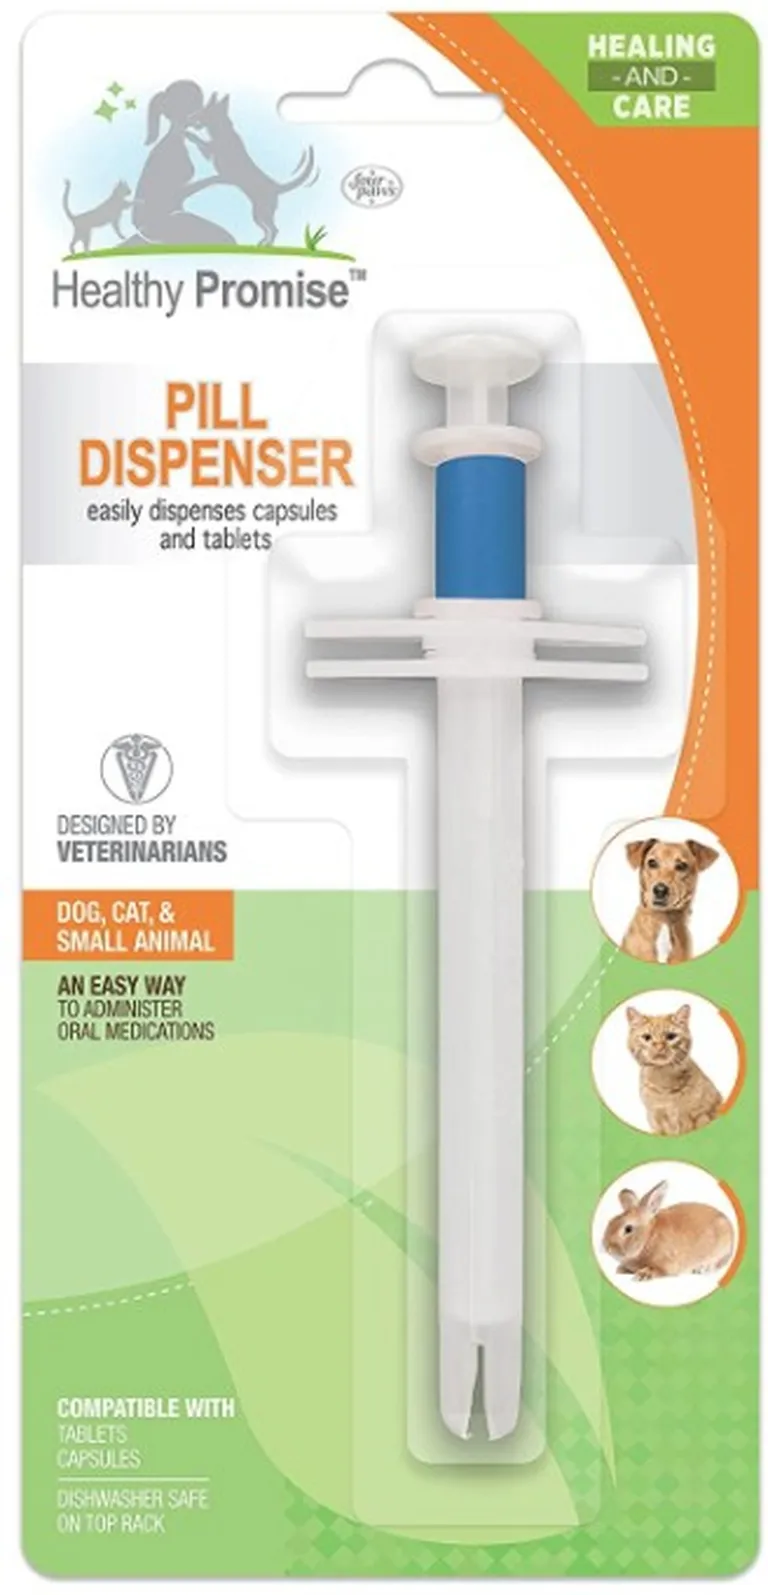 Four Paws Quick and Easy Pill Dispenser Photo 1